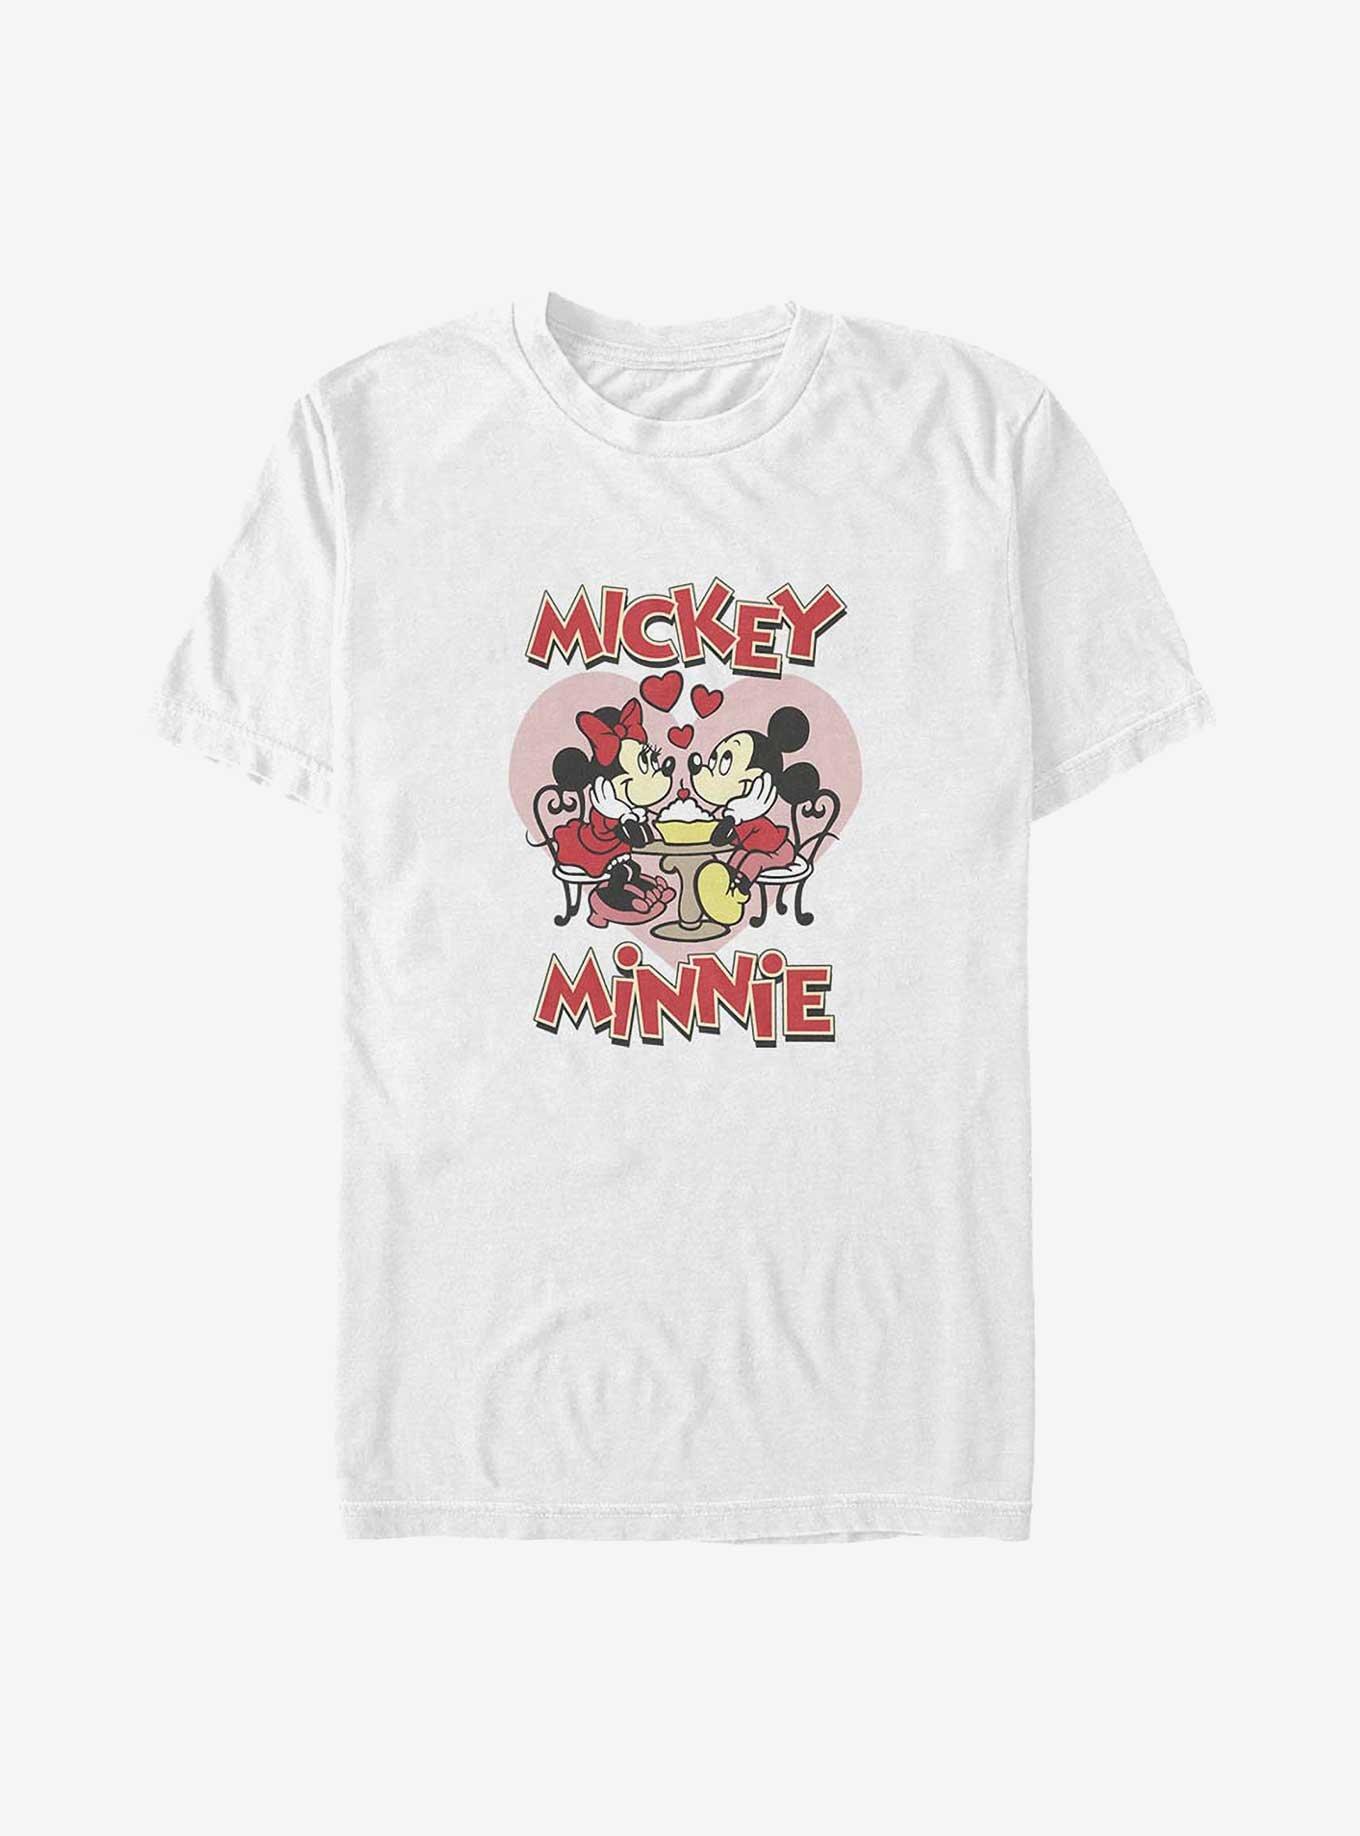 Disney Mickey Mouse Mickey and Minnie Sweet Sundae Big & Tall T-Shirt, WHITE, hi-res